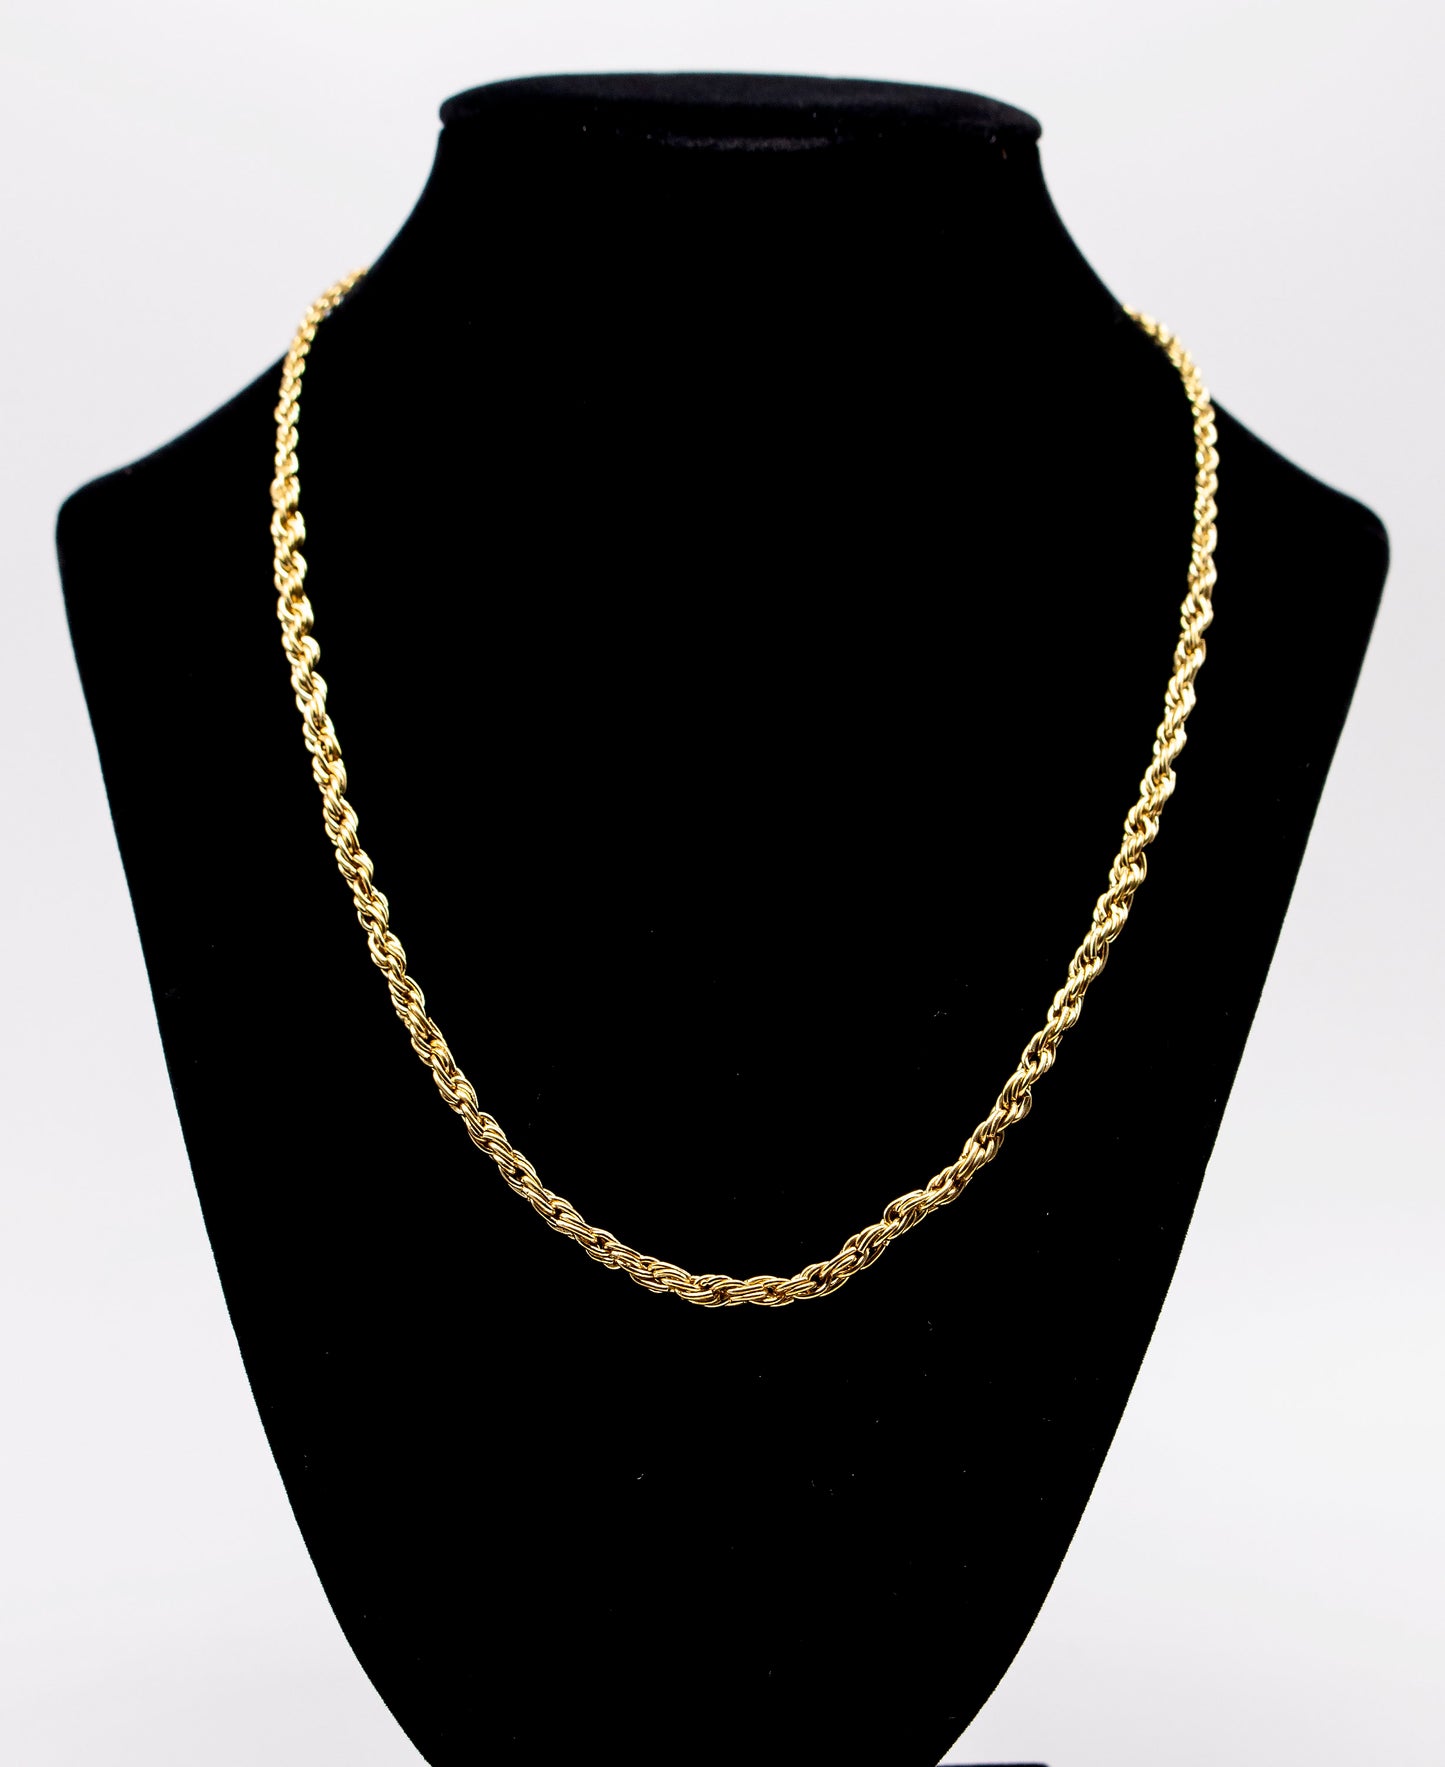 Adjustable Hand-Braided Chain with Cobra Clasp - Brass